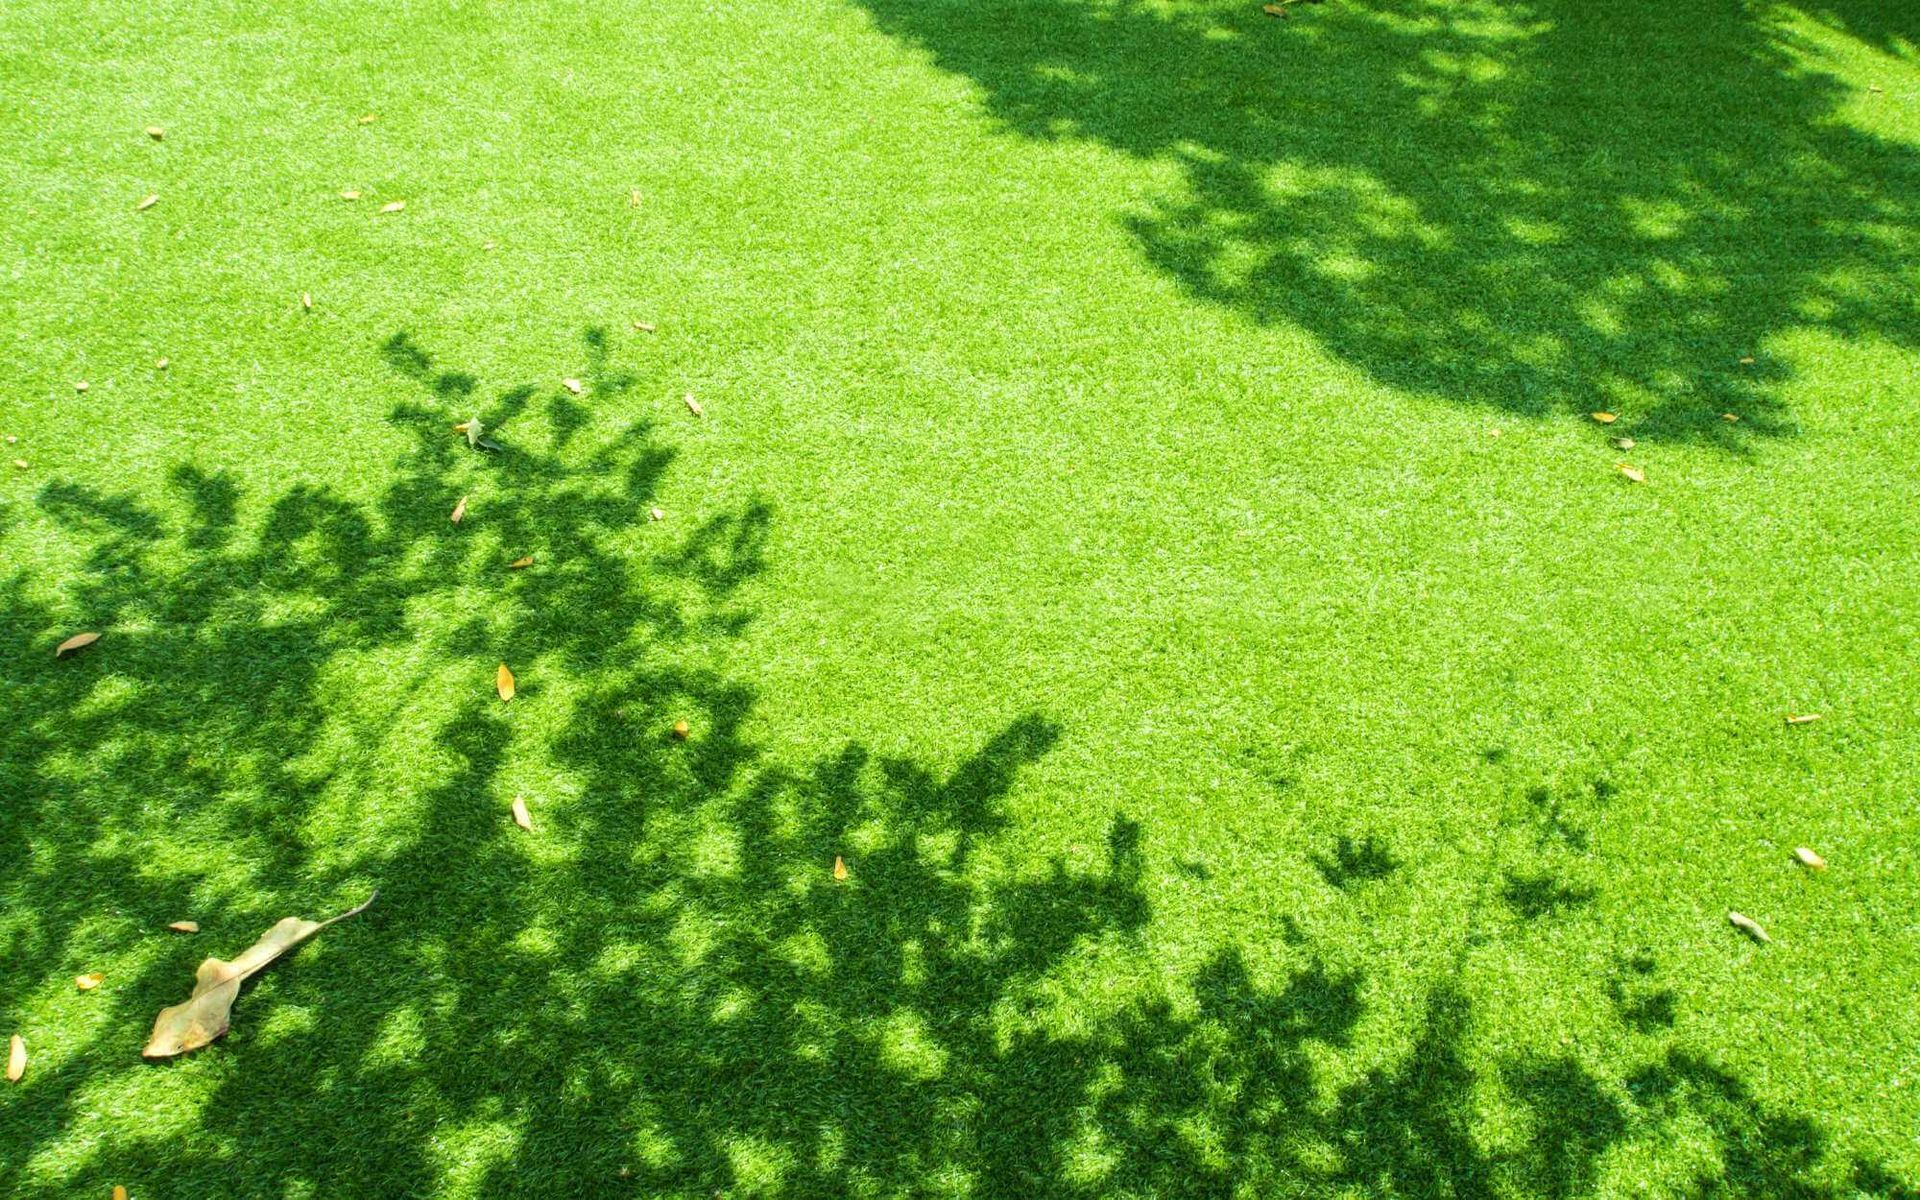 artificial grass lawn exposed to direct sunlight